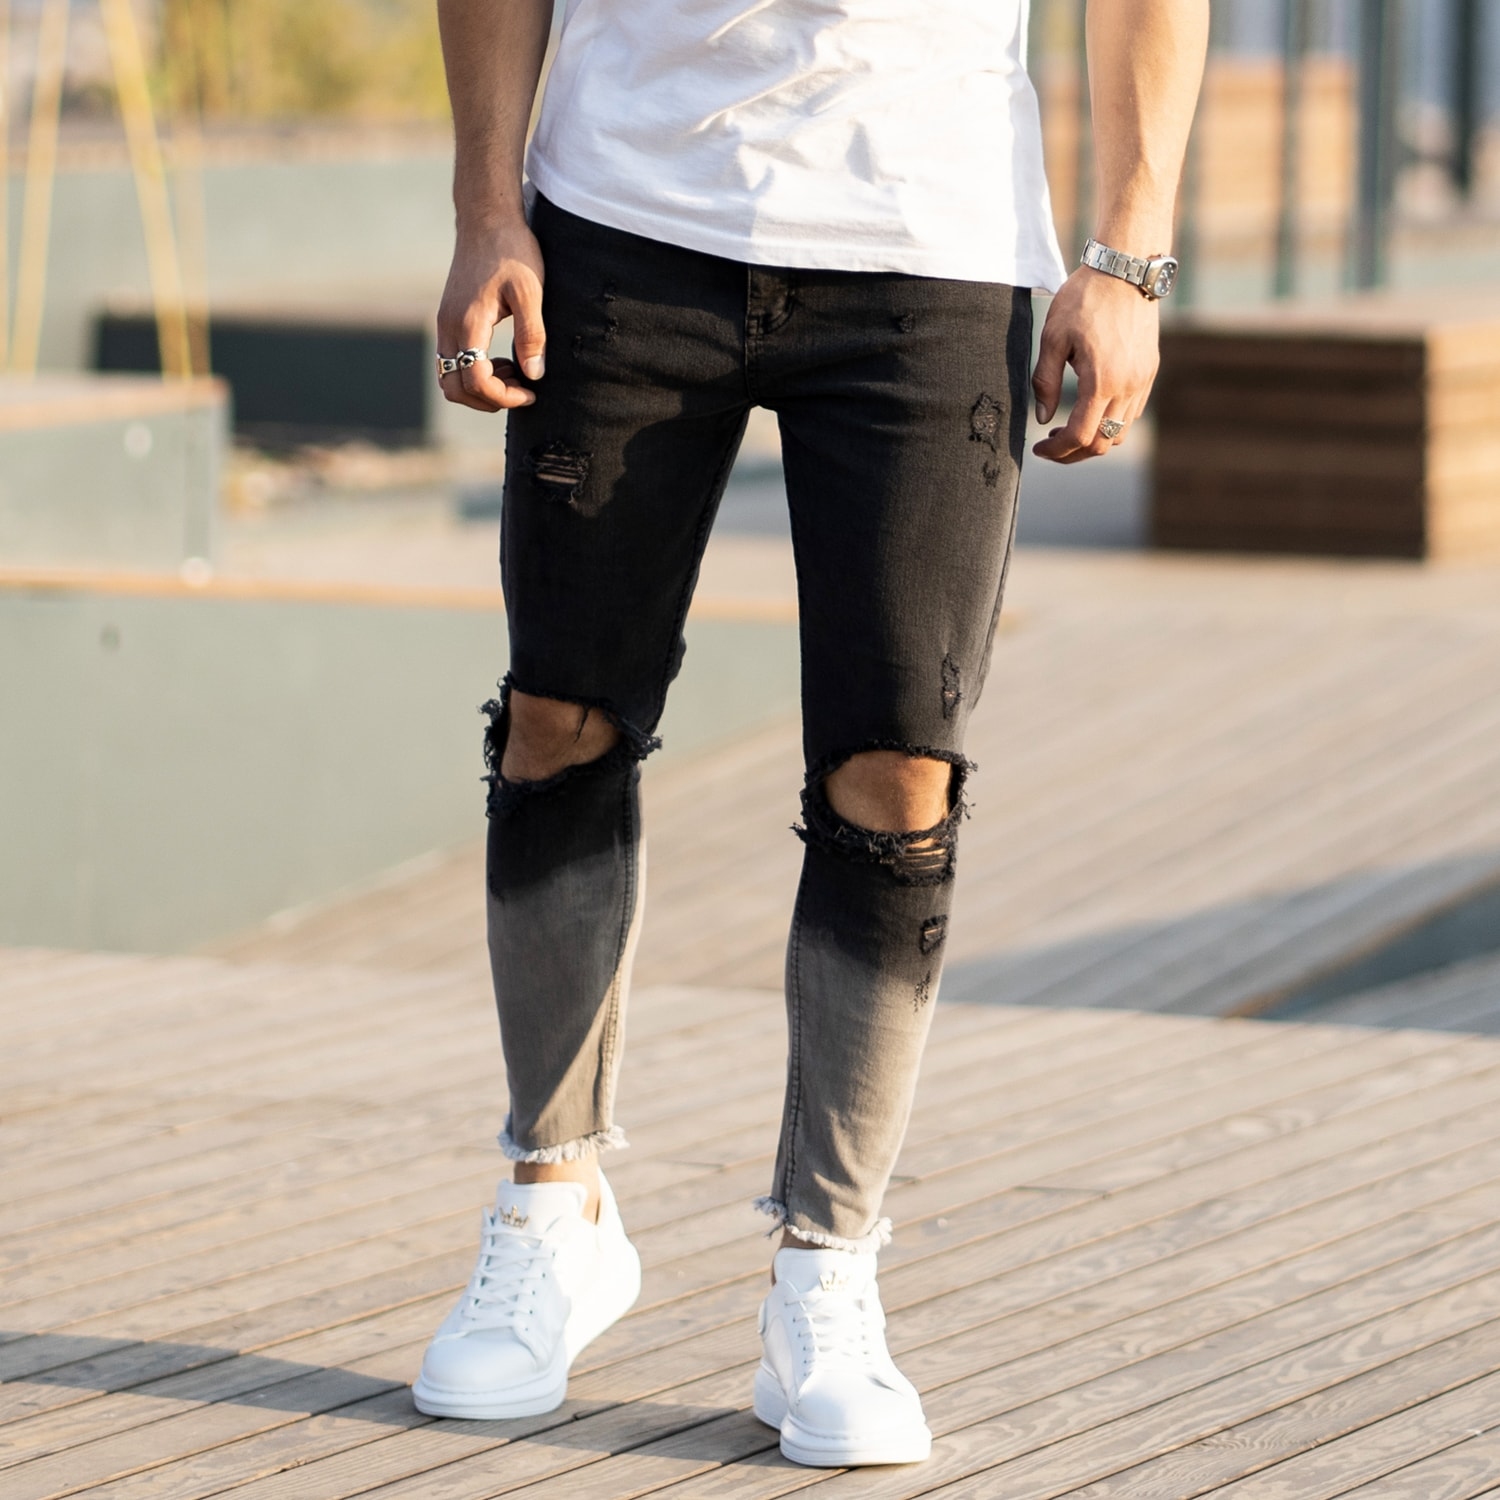 Men's Smoked-Gray Ripped Jeans